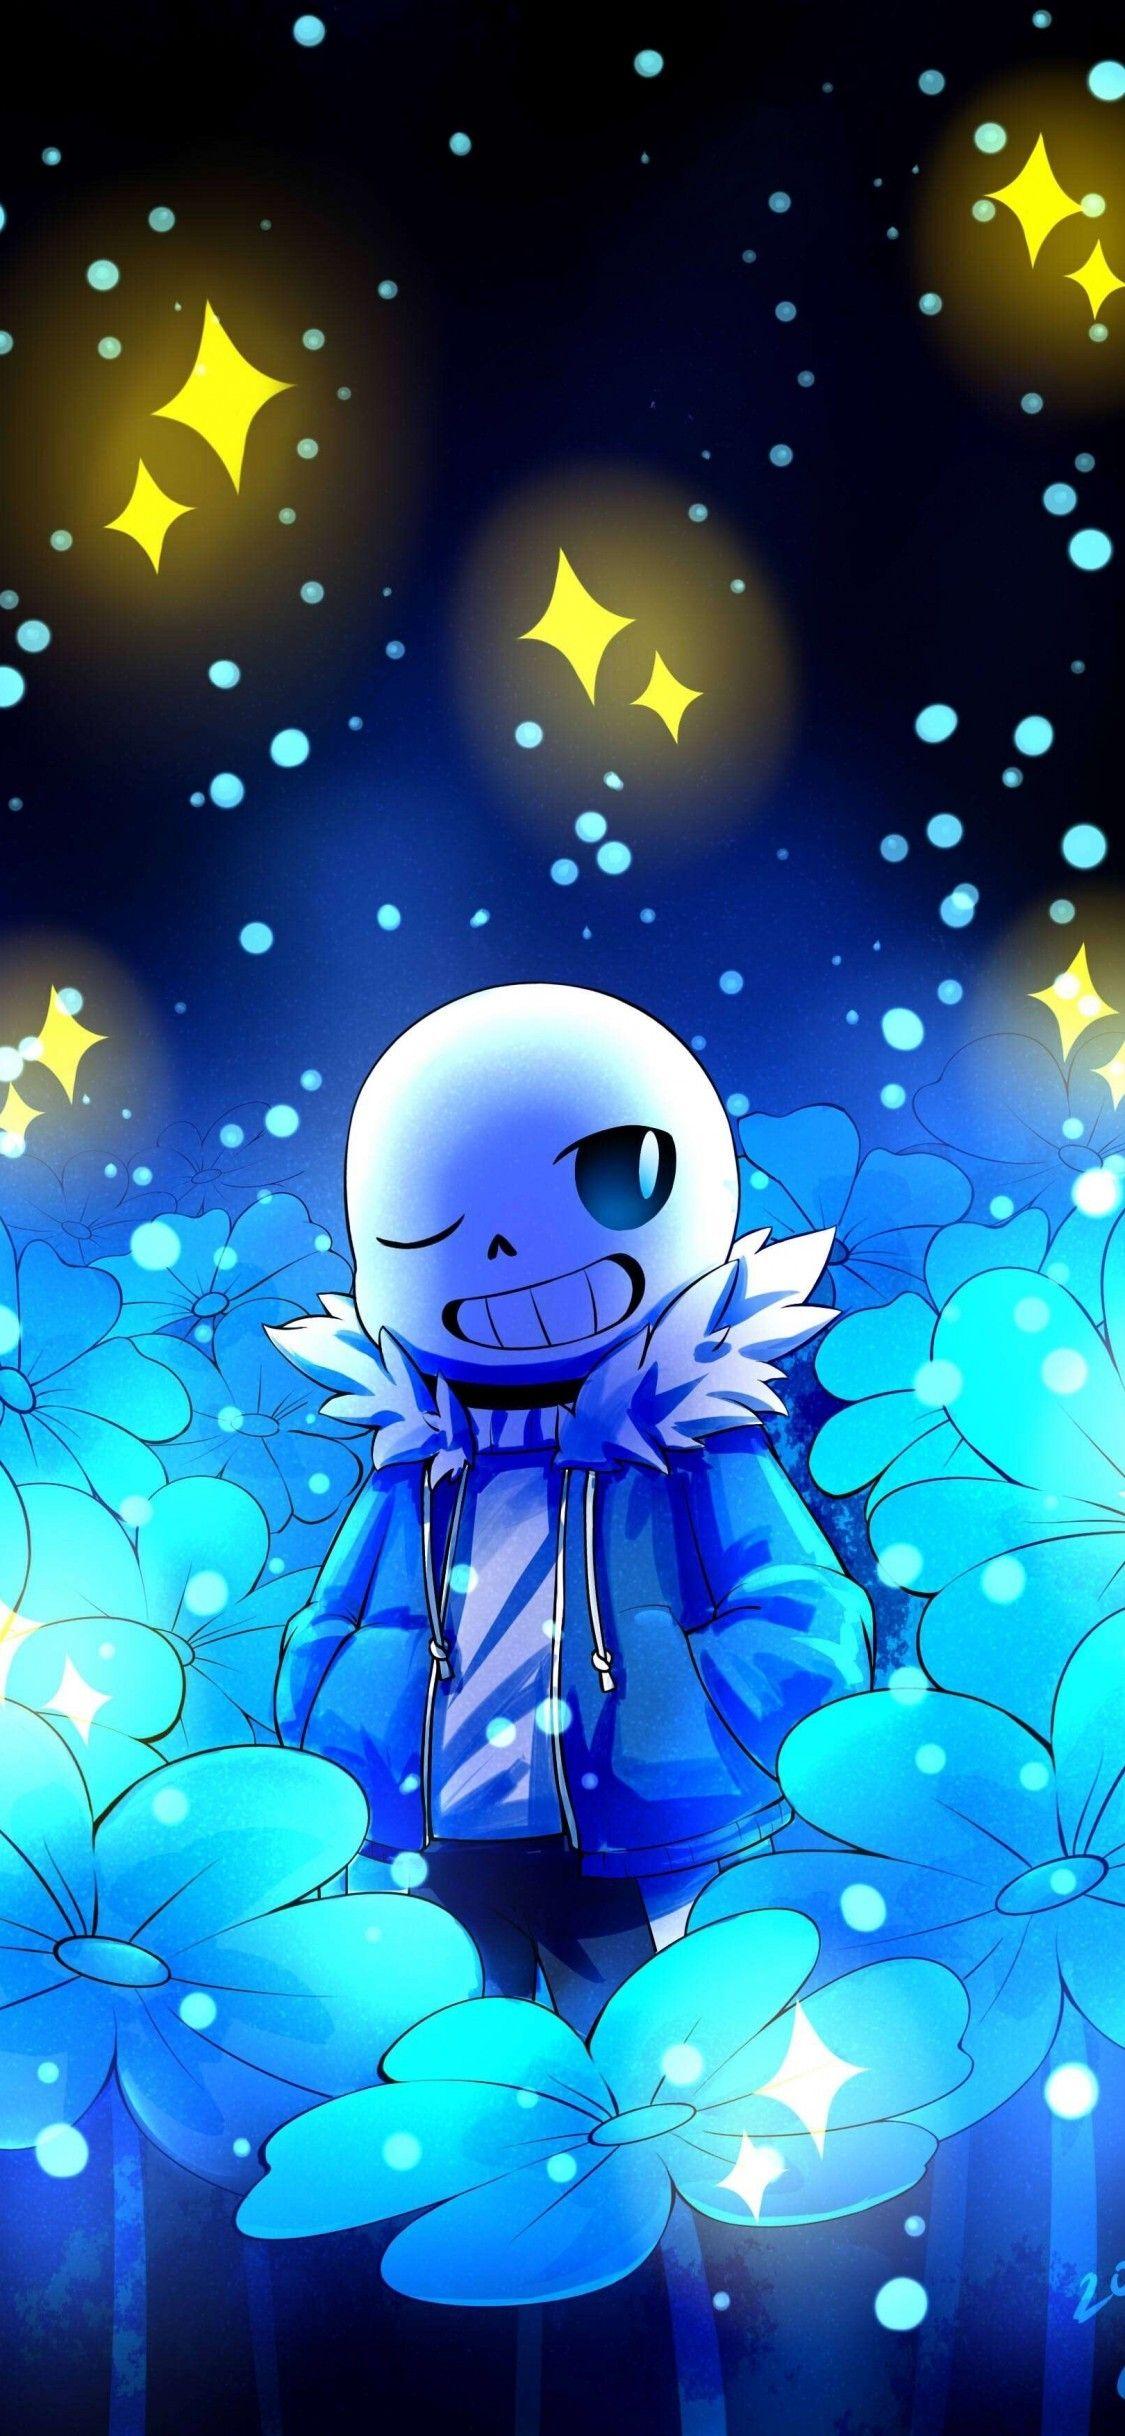 I tried making another Napstablook phone wallpaper hope you guys like this  one too  rUndertale